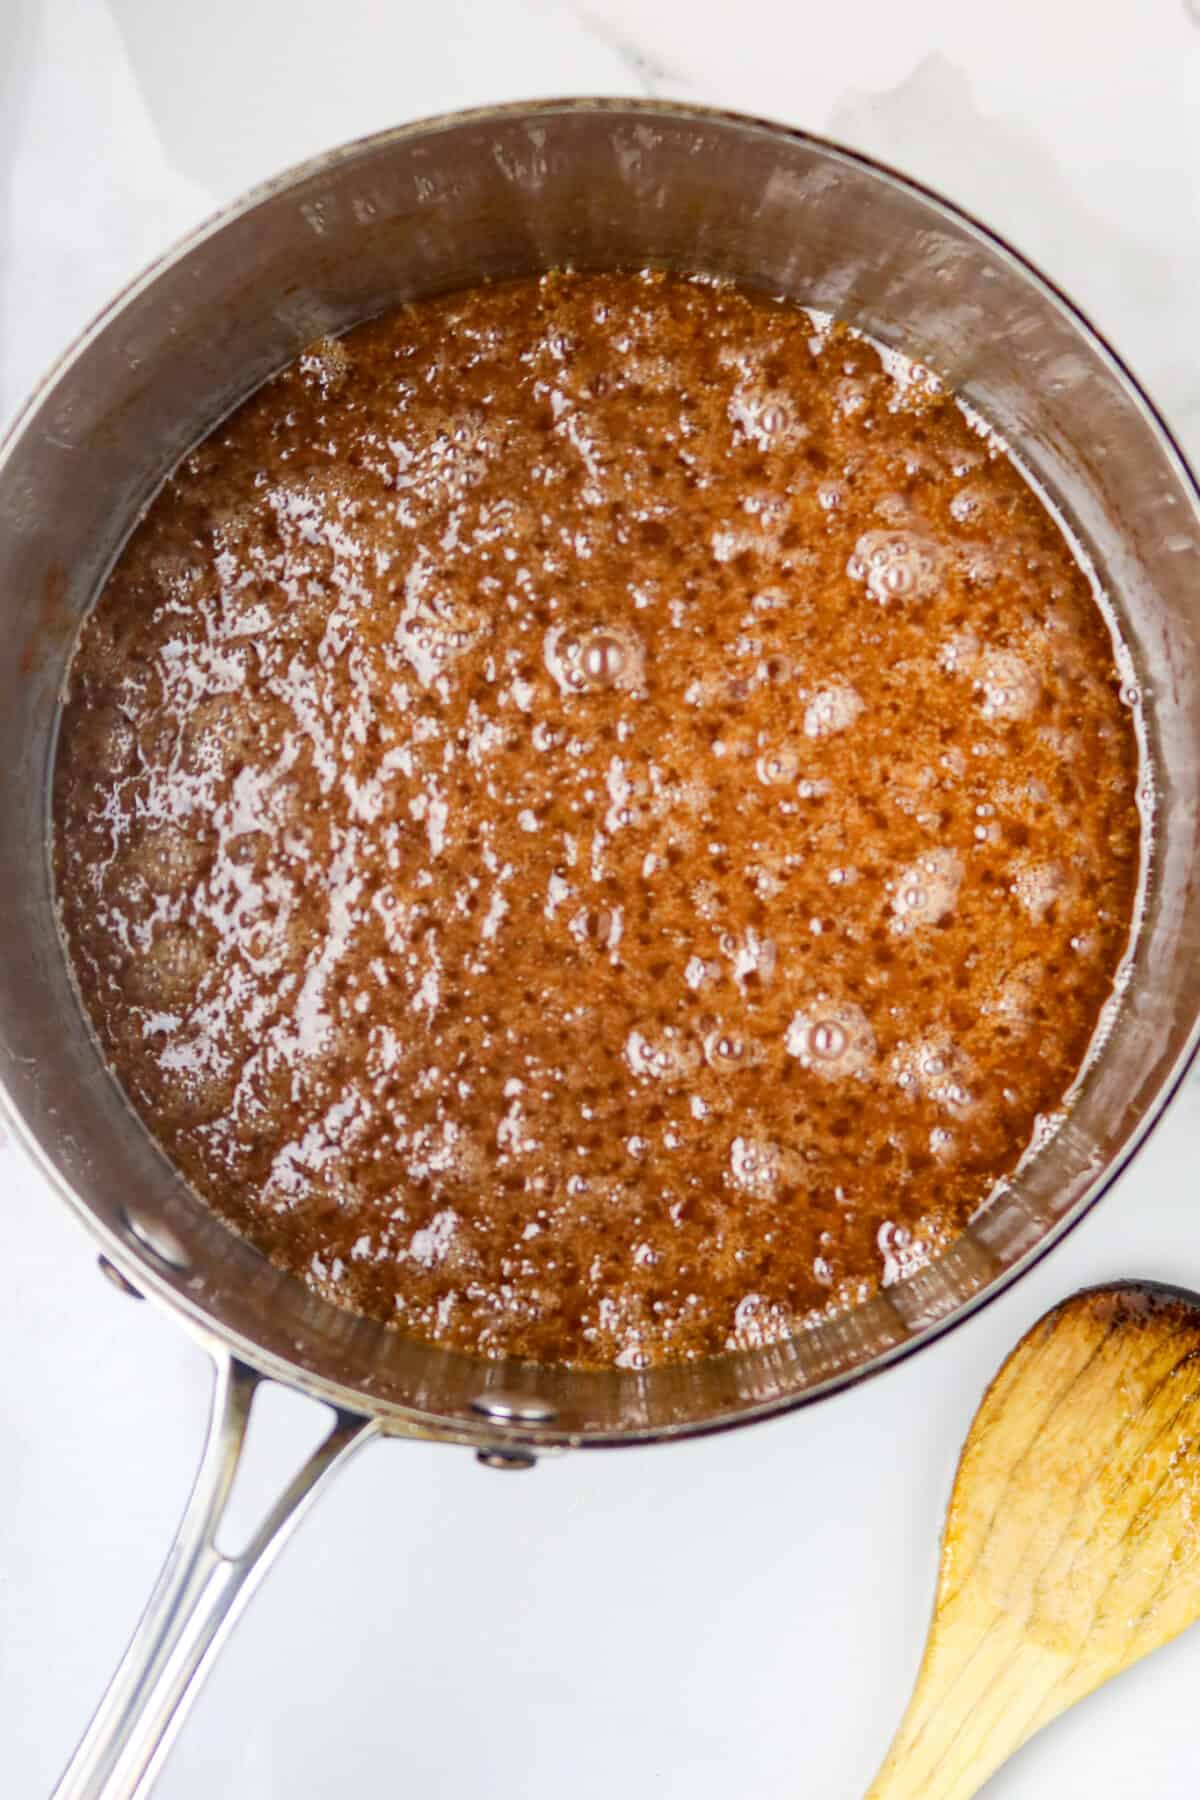 A sauce pan with bubbling candy in it.